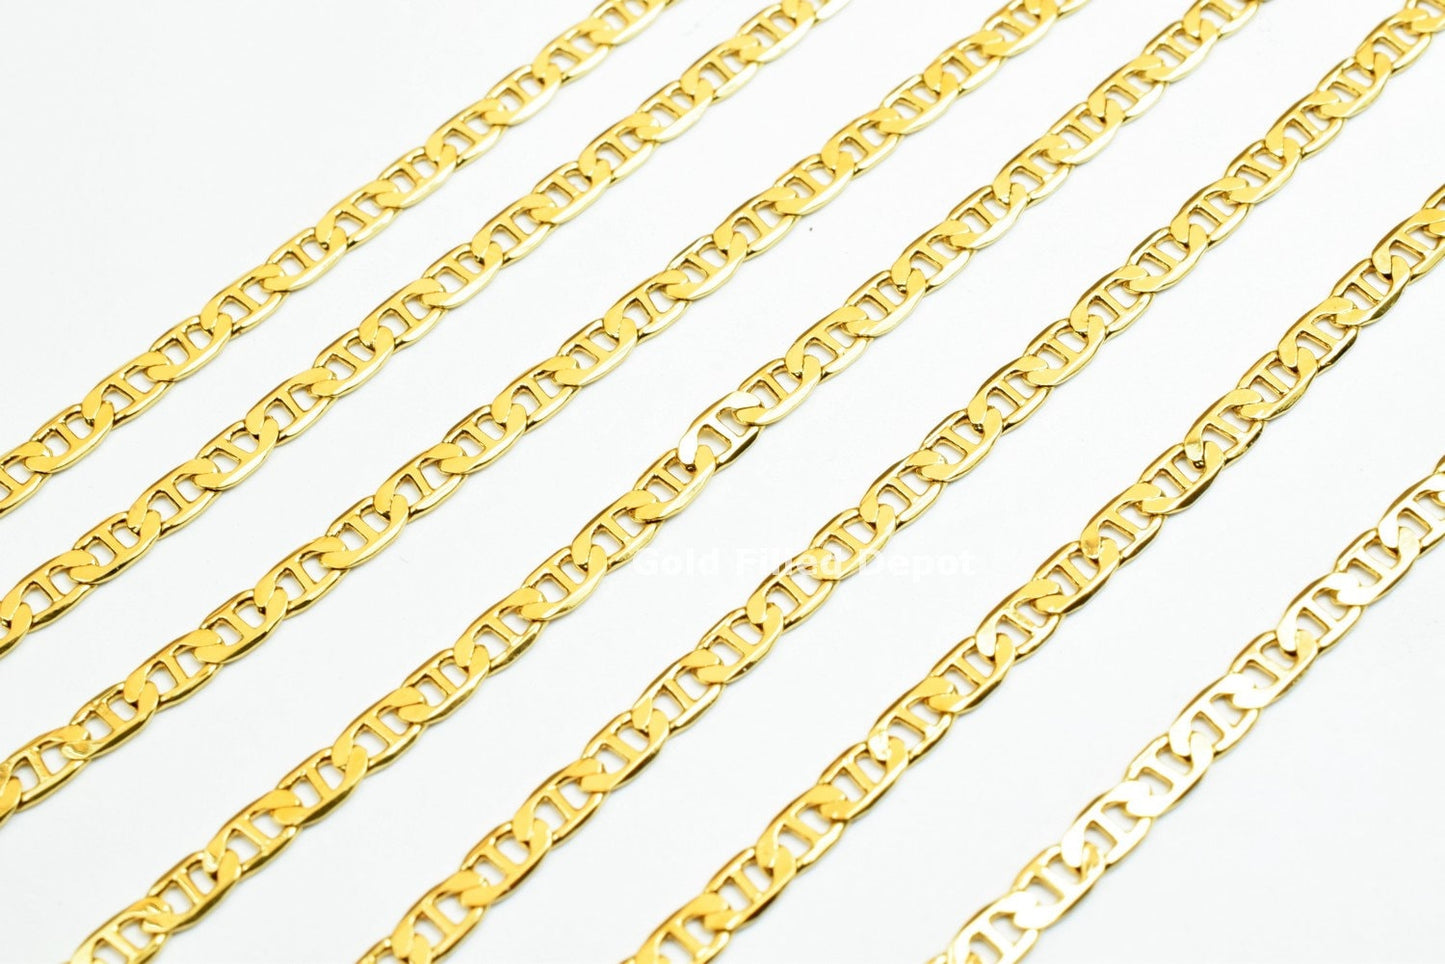 3 Feet 18K Gold Filled Anchor Chain/Marine Chain/Figarucci Chain Width 2.5mm Thickness 0.25mm Gold-Filled finding for Jewelry Making GFC032